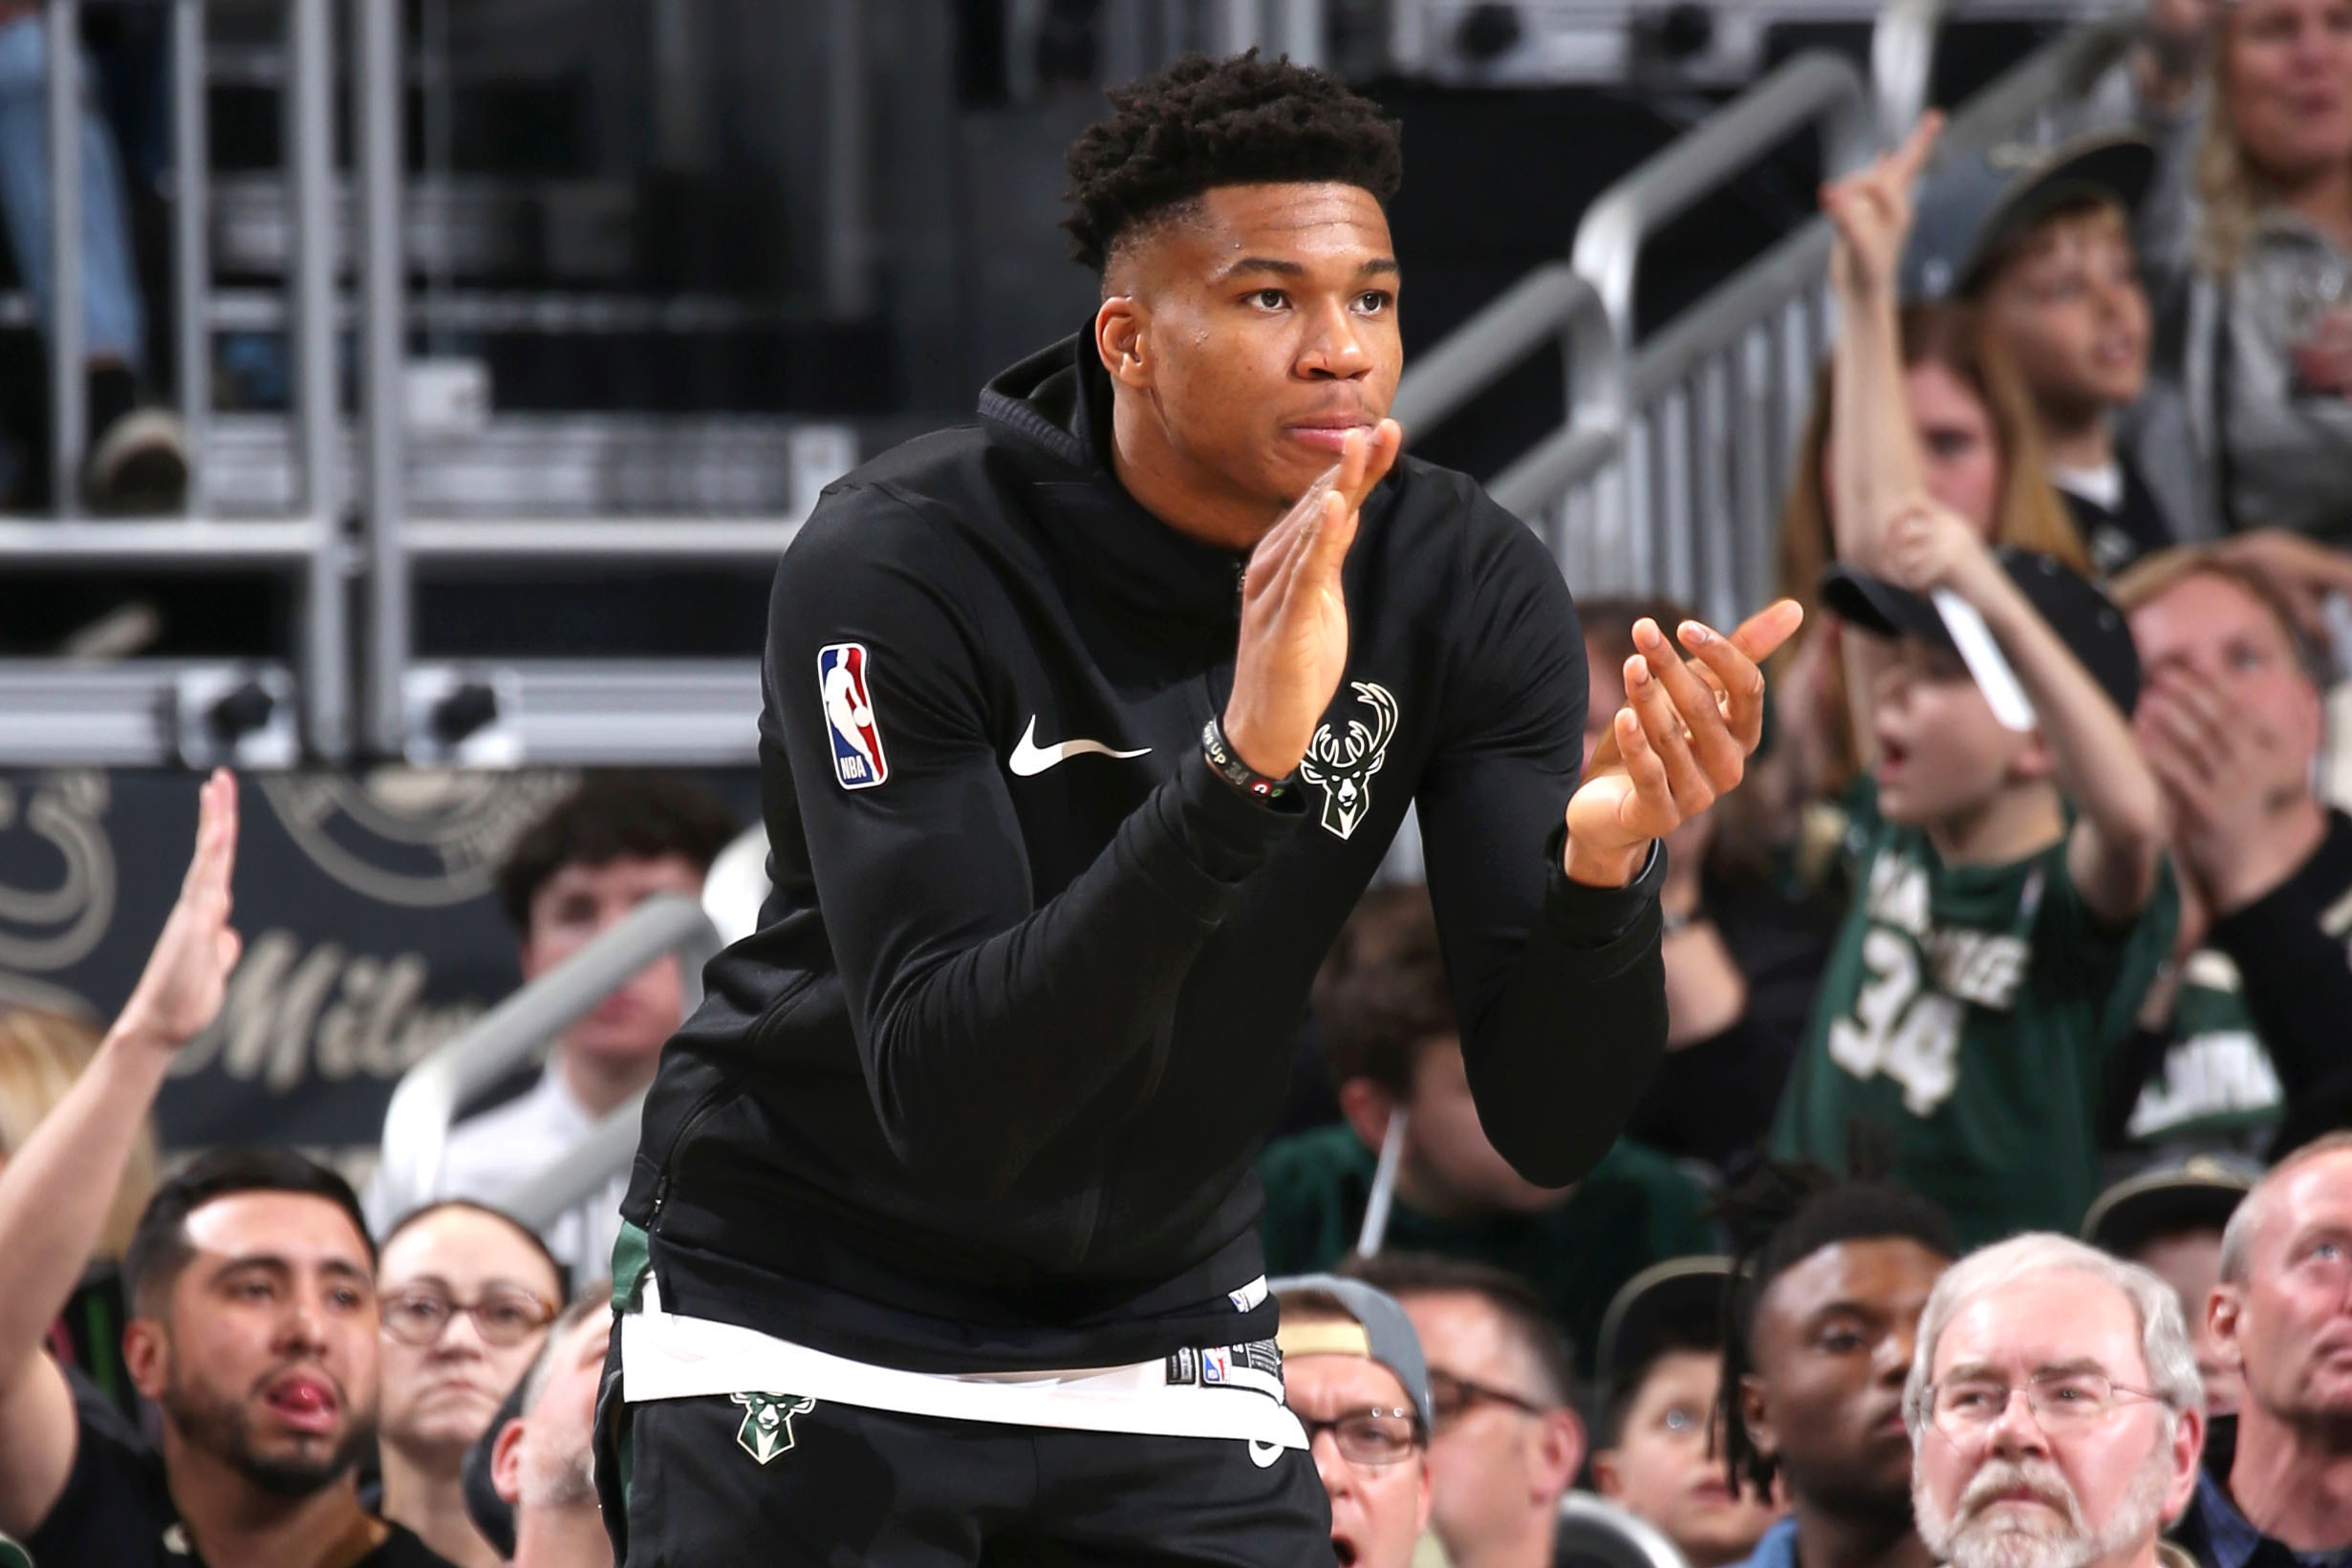 Giannis may demand an Early Trade Deal